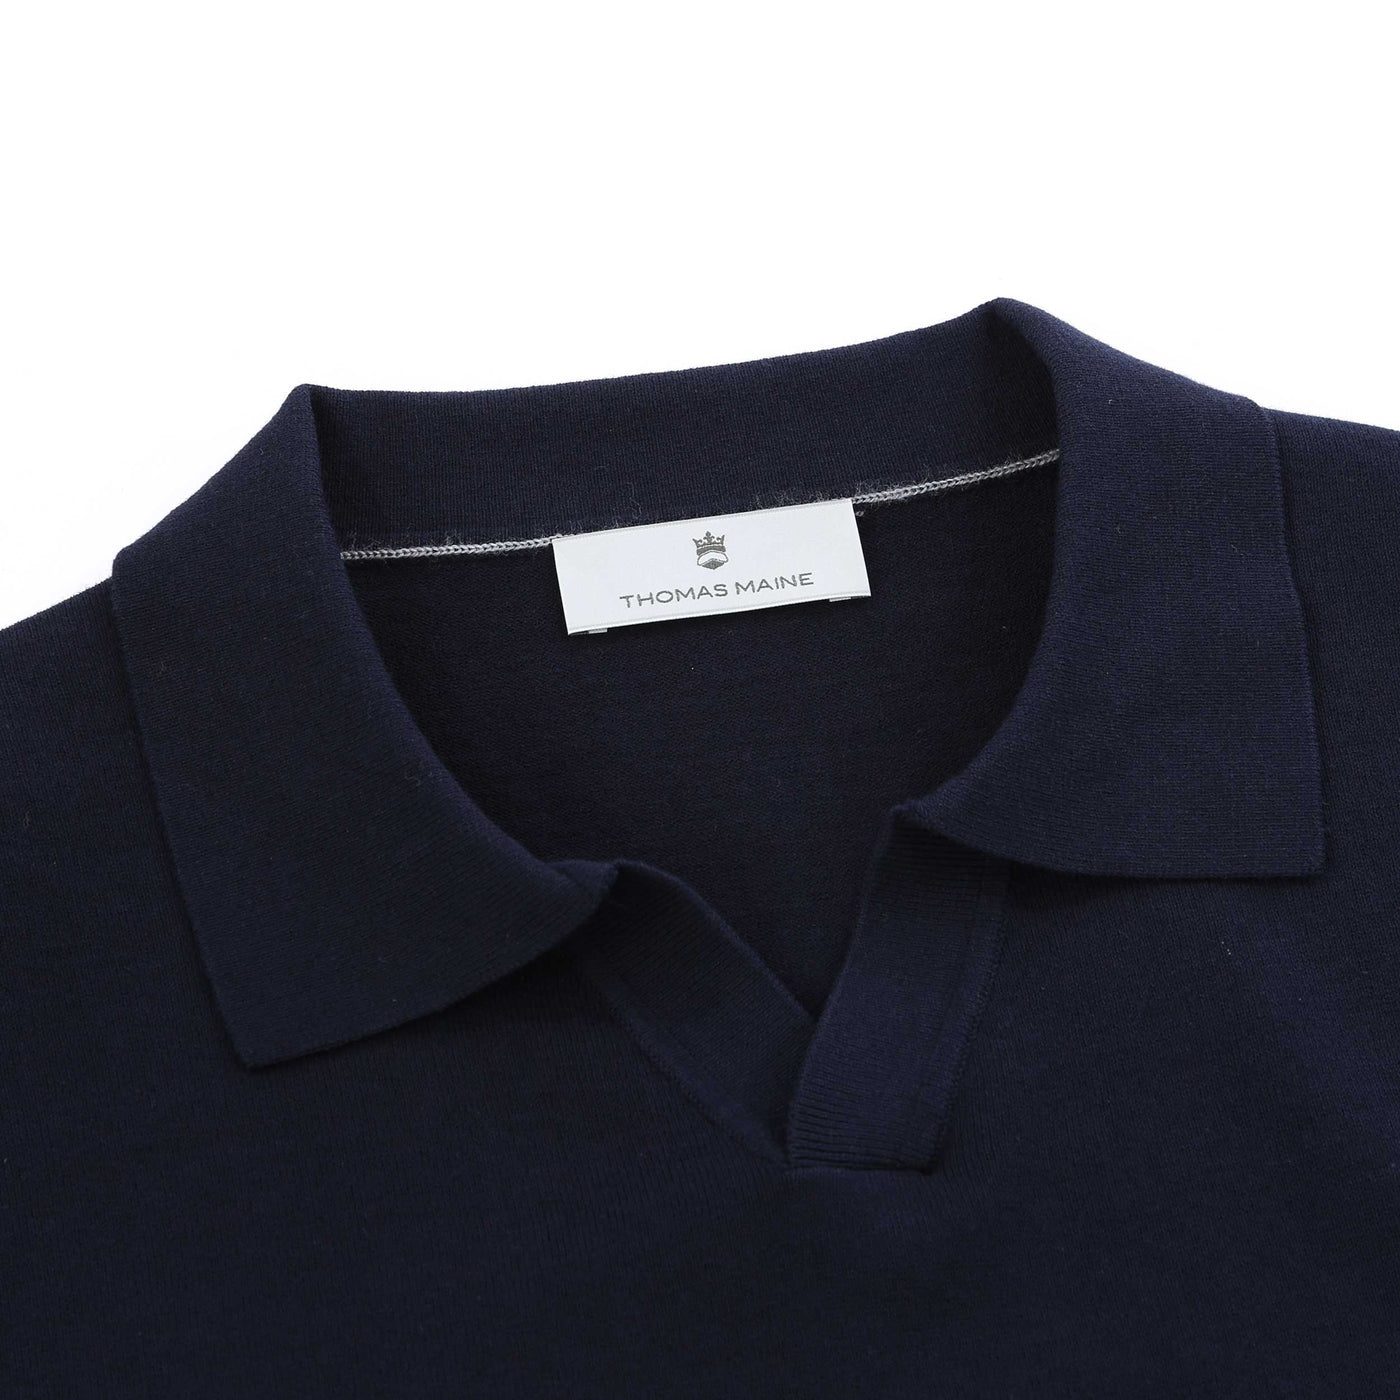 Thomas Maine Open Neck Knit Polo in Navy Placket